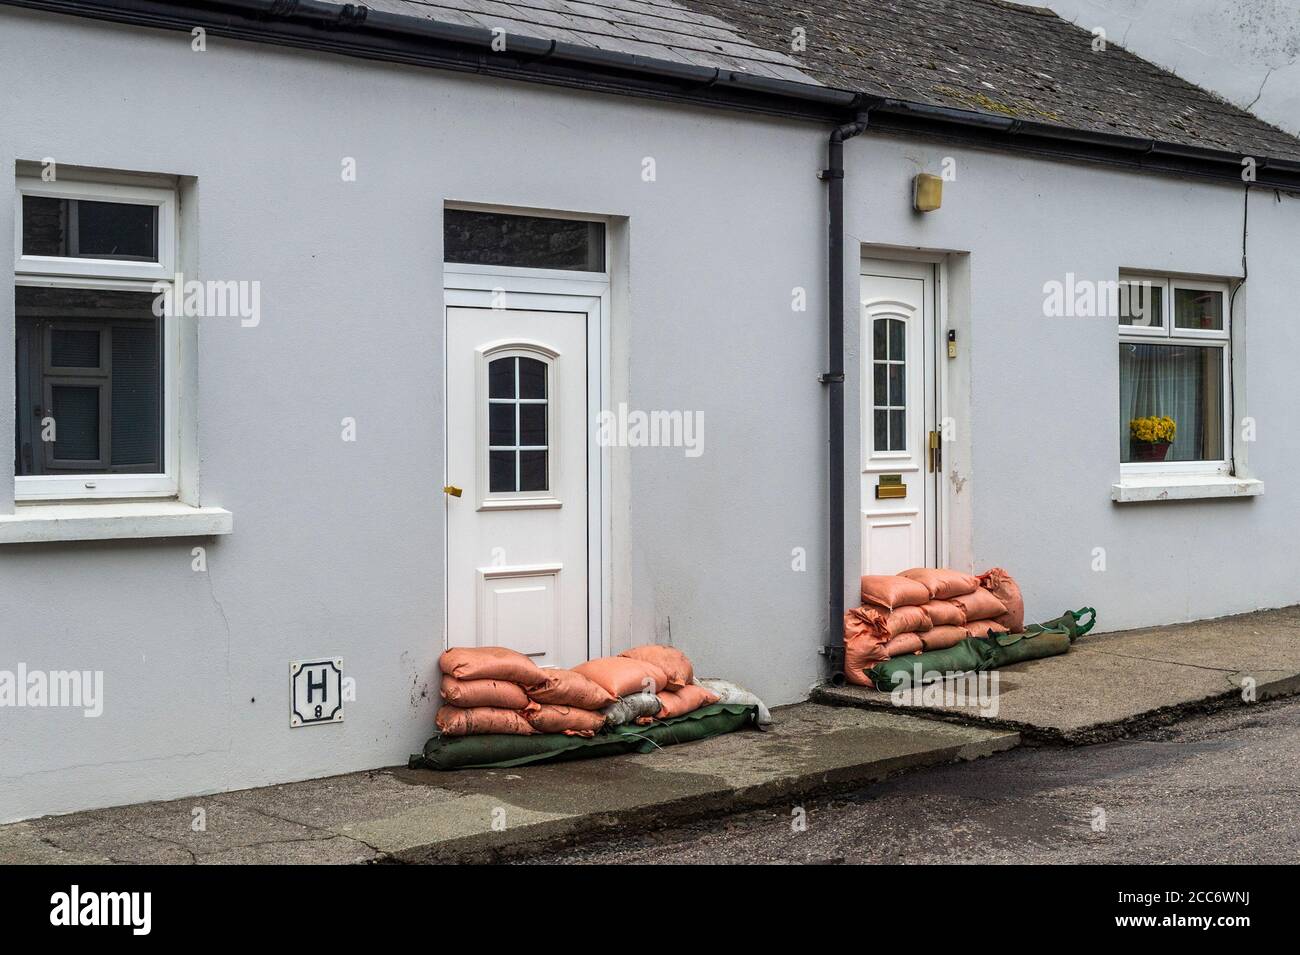 Rosscarbery, West Cork, Ireland. 19th Aug, 2020. Cork County Council has placed sandbags into position in Rosscarbery ahead of Storm Ellen and a Met Éireann red wind warning for County Cork. Rosscarbery was hit badly with floods last weekend. Credit: AG News/Alamy Live News Stock Photo